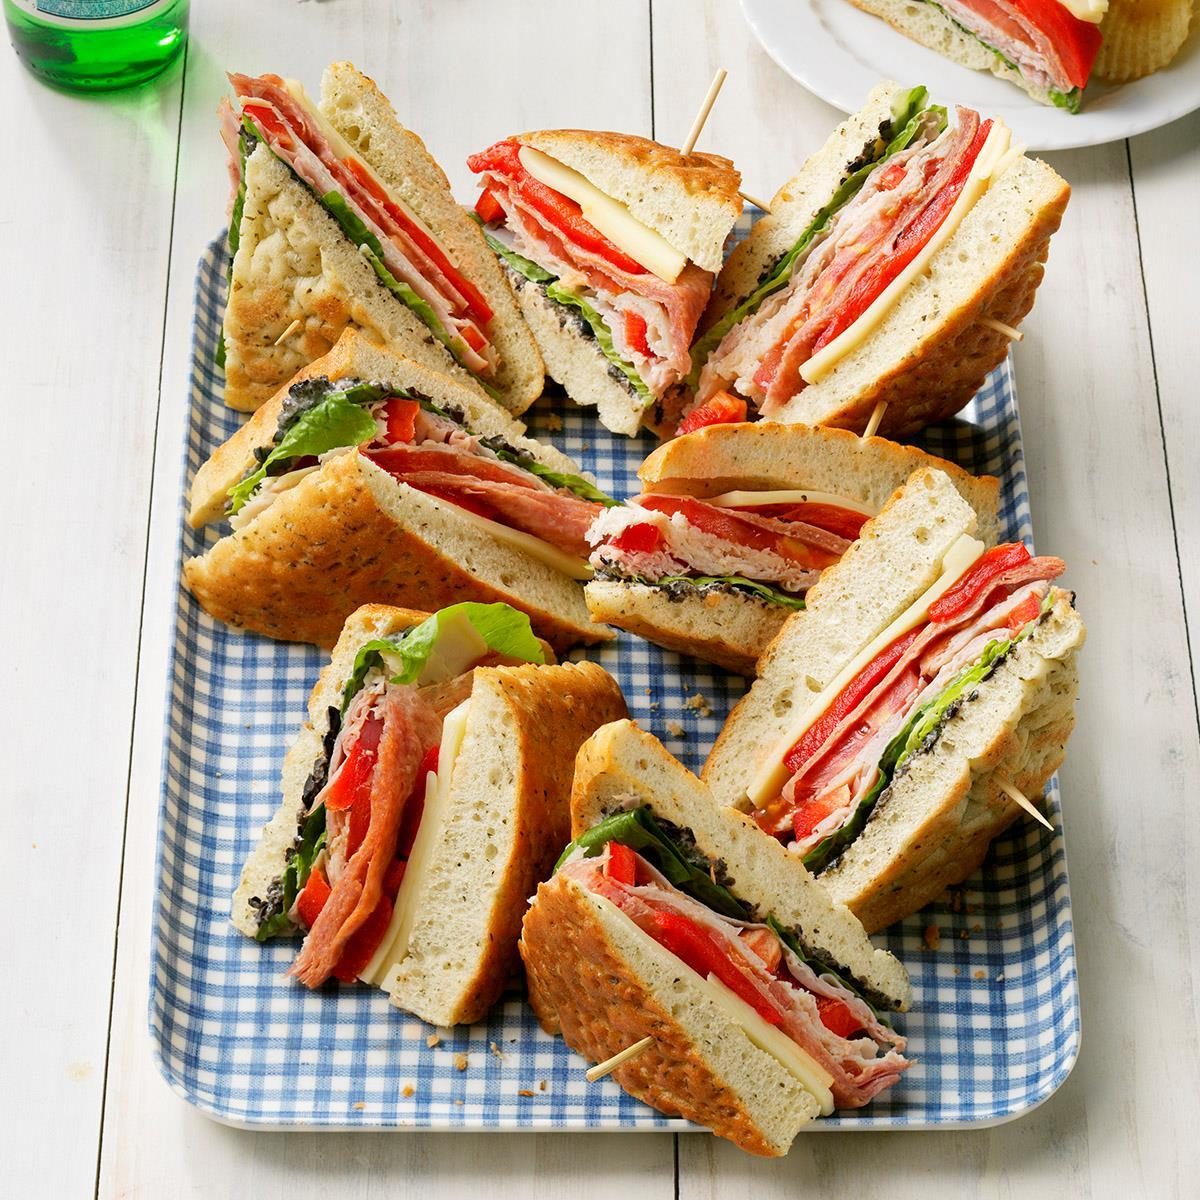 <p>Slices of this pretty sandwich make any casual get-together more speical. Add or change ingredients to your taste. —Peggy Woodward, Shullsburg, Wisconsin</p> <div class="listicle-page__buttons"> <div class="listicle-page__cta-button"><a href='https://www.tasteofhome.com/recipes/focaccia-sandwiches/'>Get Recipe</a></div> </div>